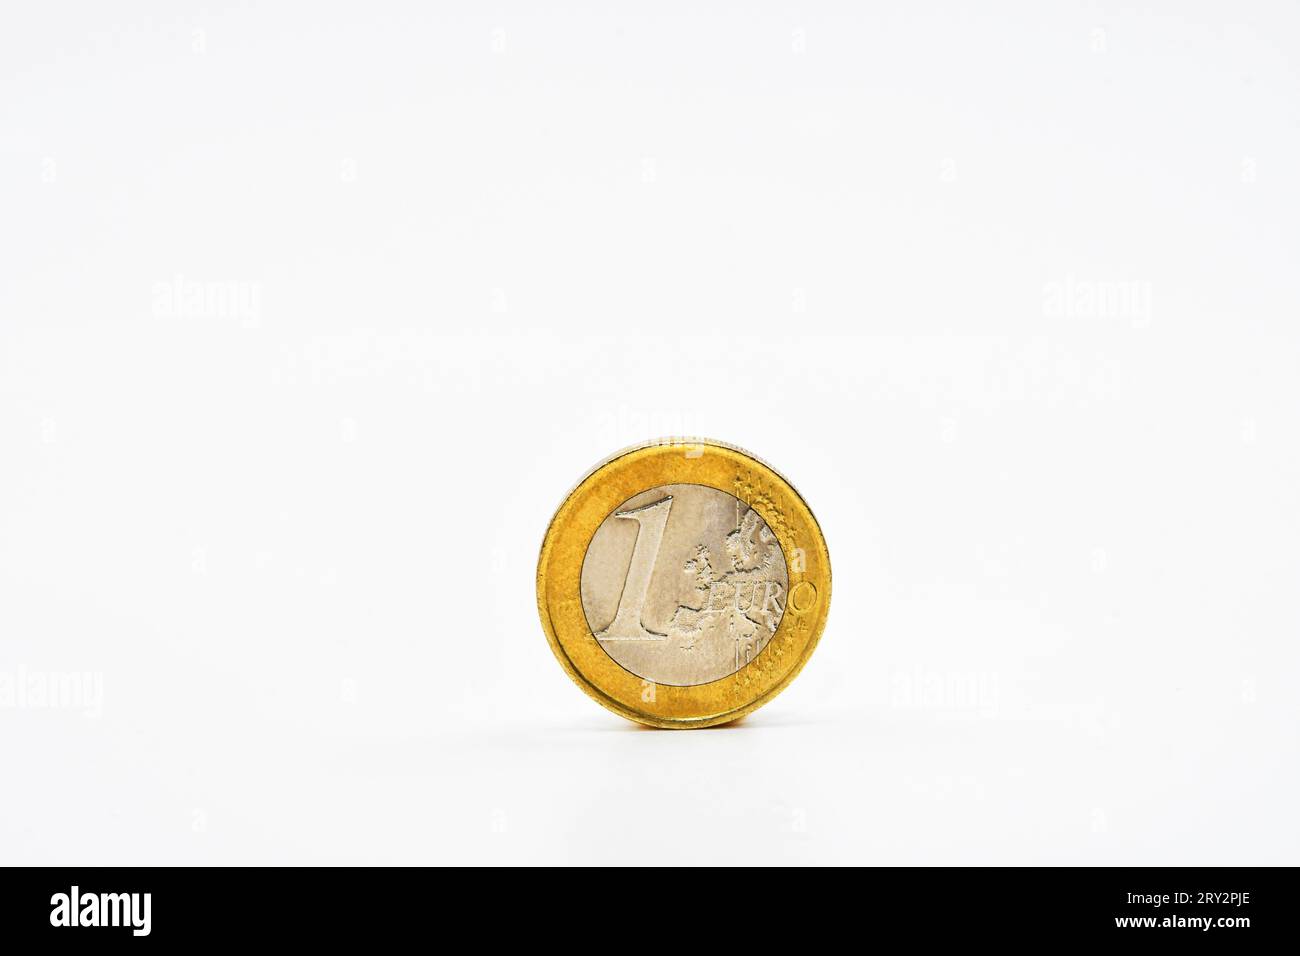 One Euro coin isolated on a plain white background. Copy space. Stock Photo